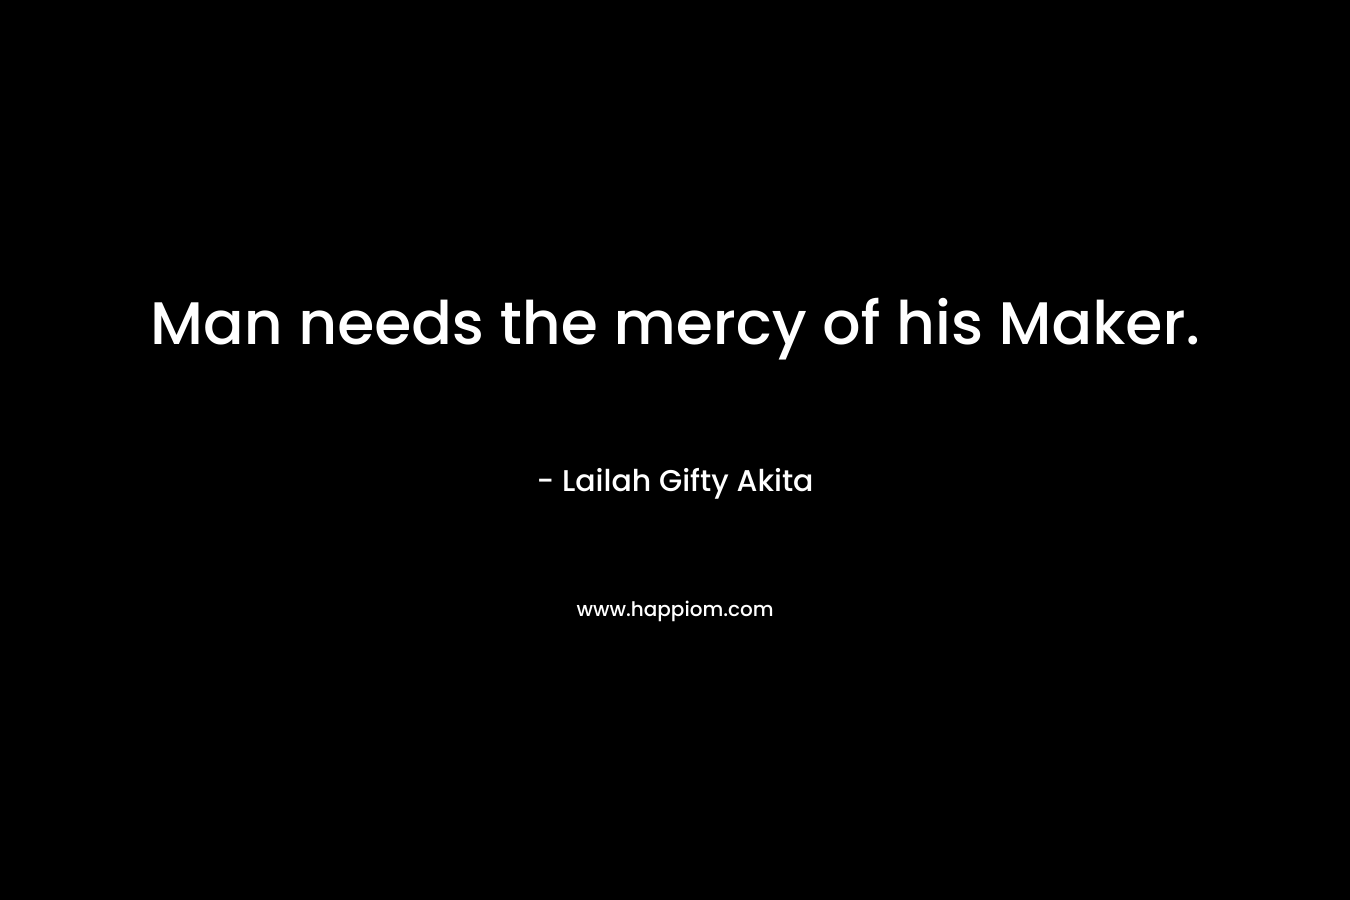 Man needs the mercy of his Maker.